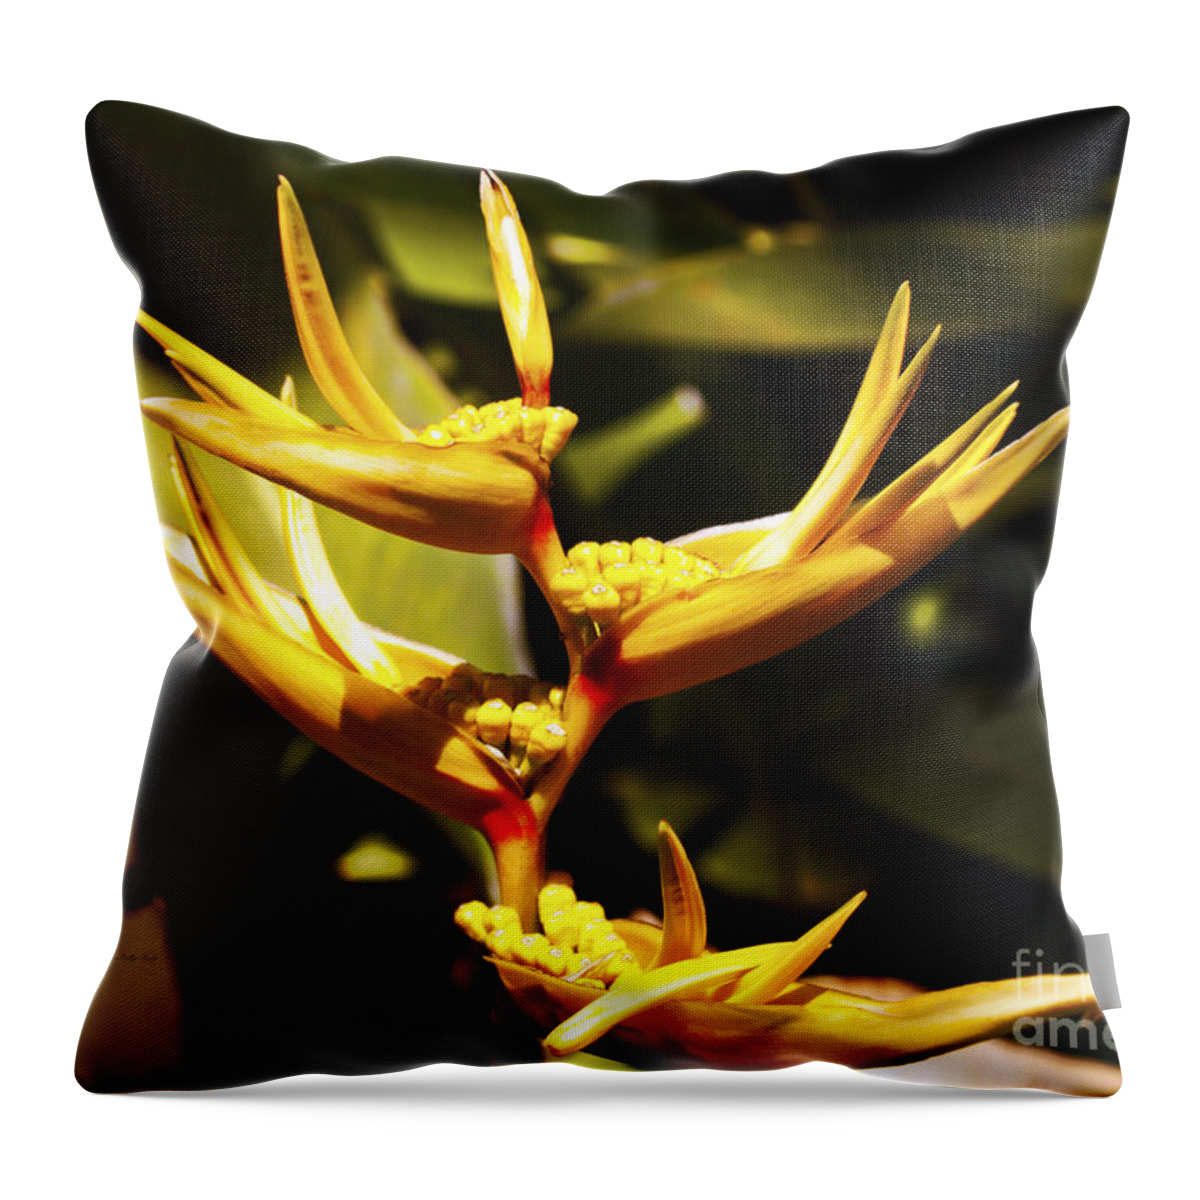 Flower Photography Throw Pillow featuring the photograph Heliconia by Patricia Griffin Brett